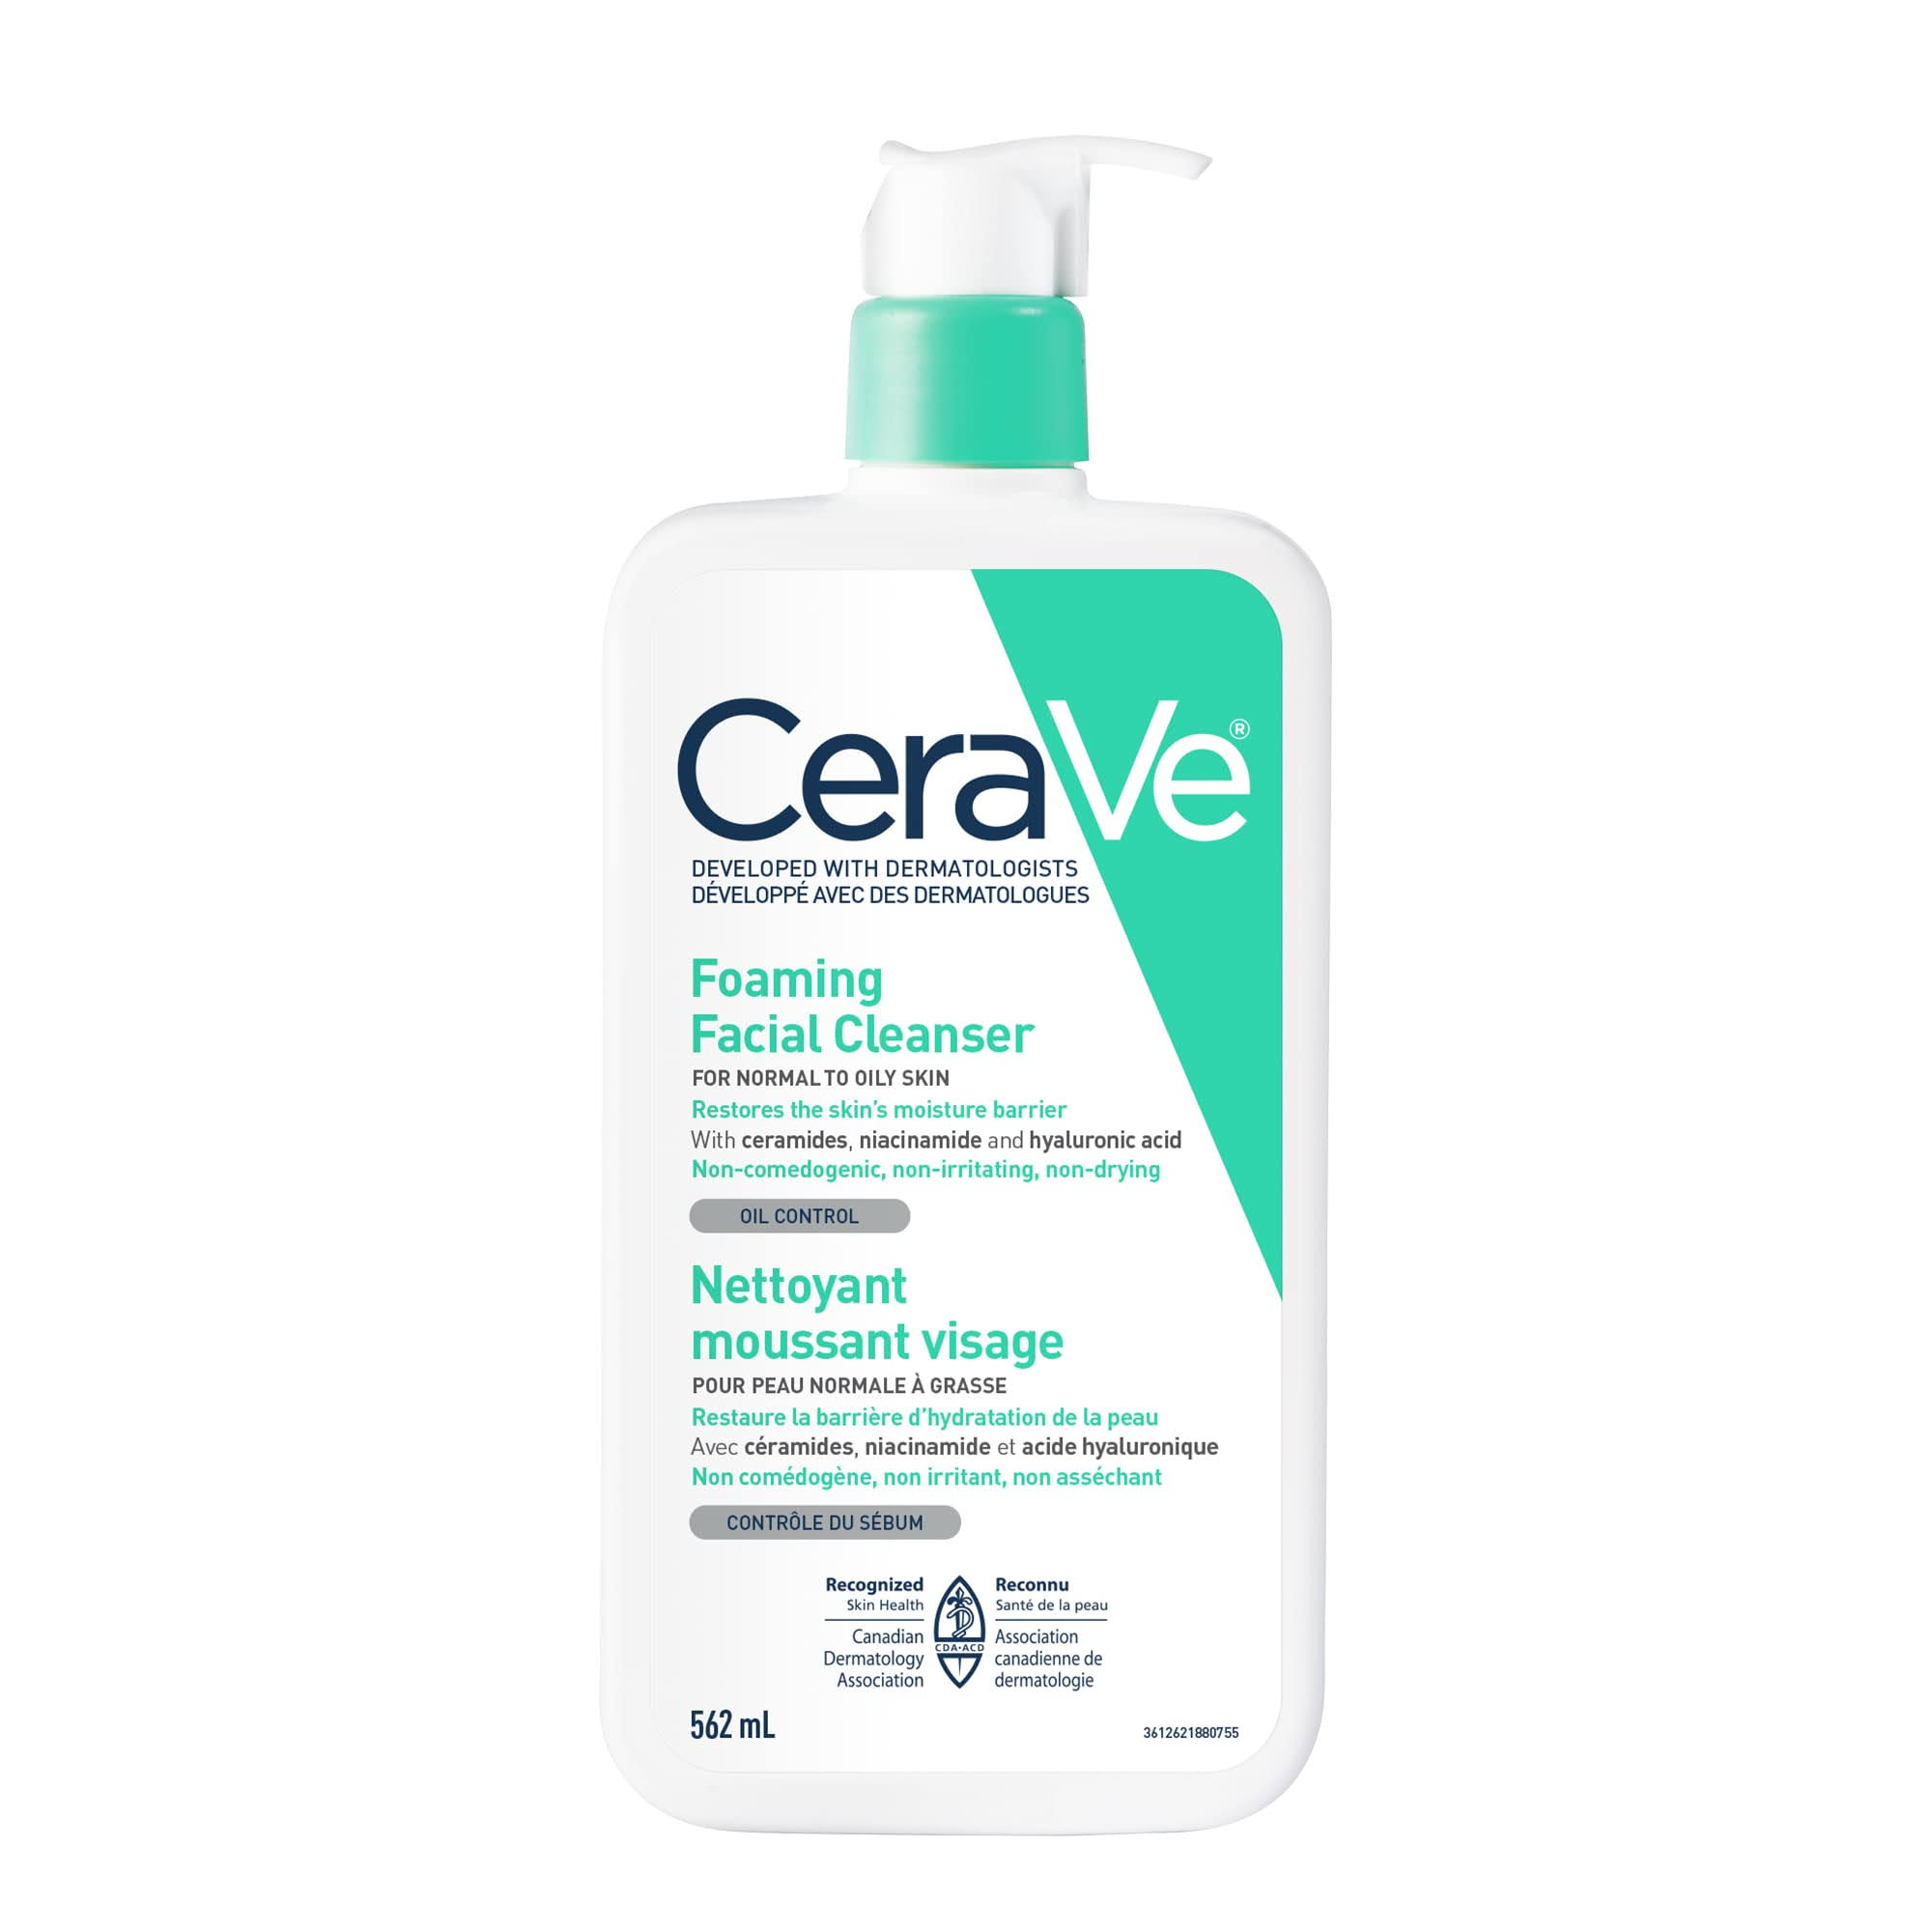 CeraVe Foaming Facial Cleanser - 562 ml